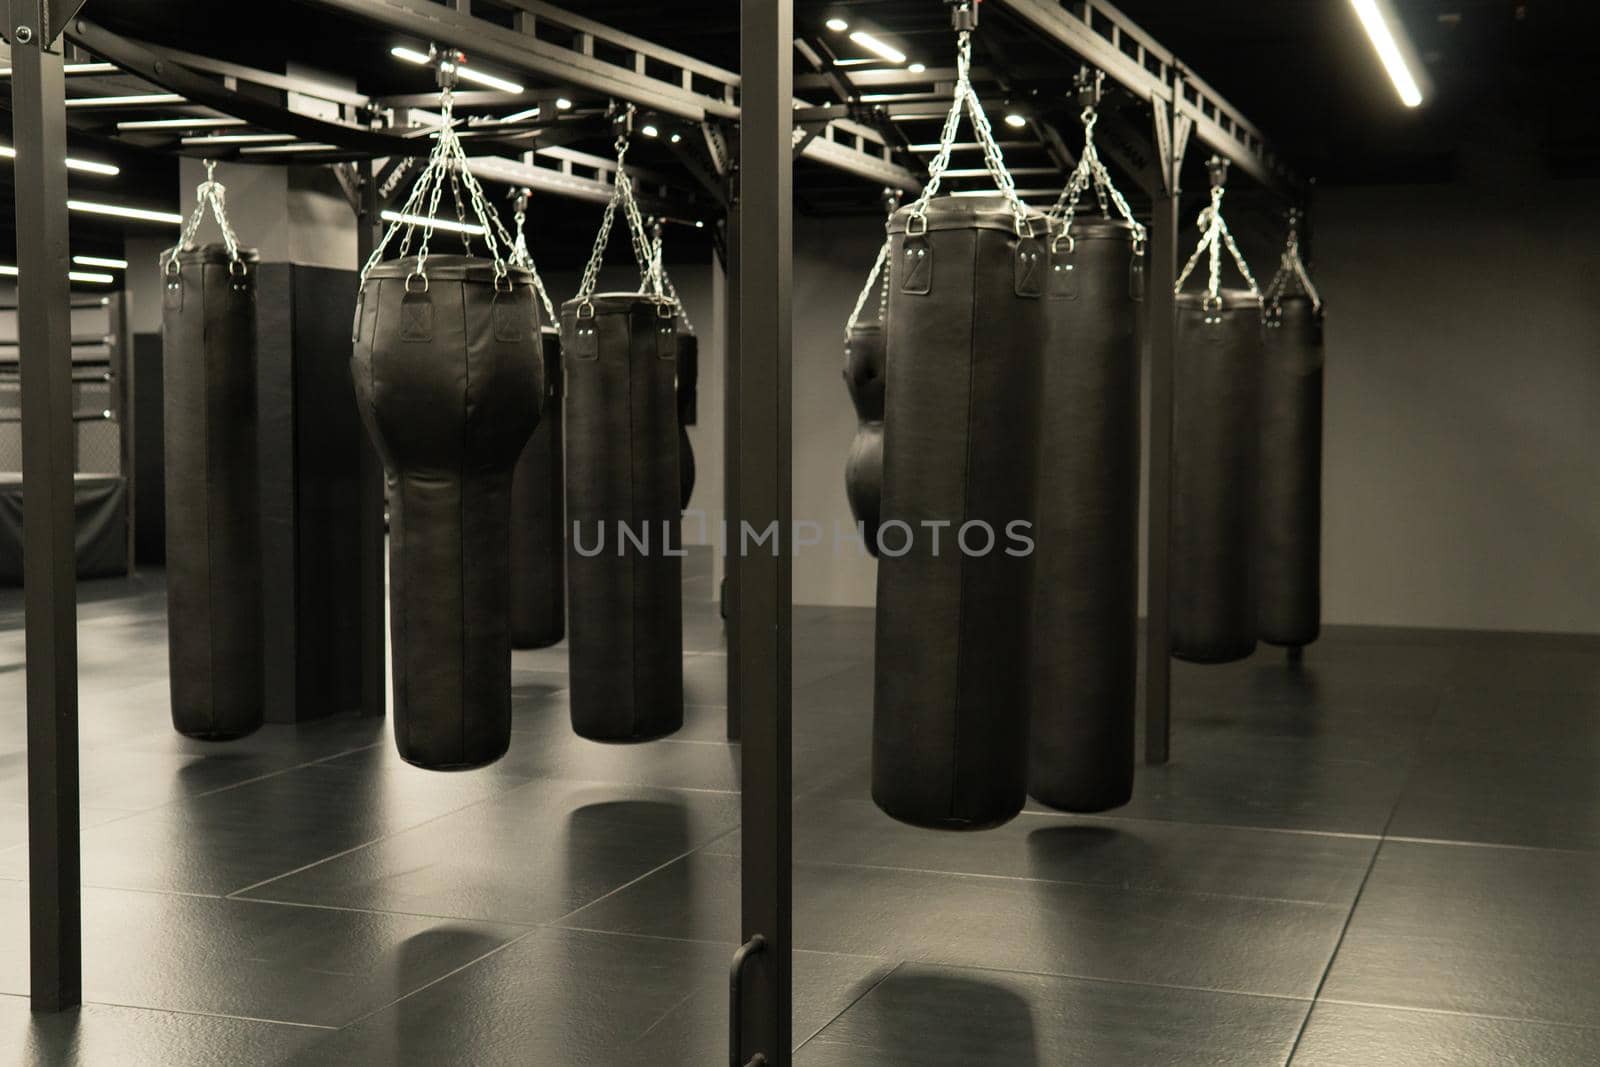 bag punching boxing background fist, In the afternoon competition sport for gym and lifestyle impact, knockout club. Leather energy empty,